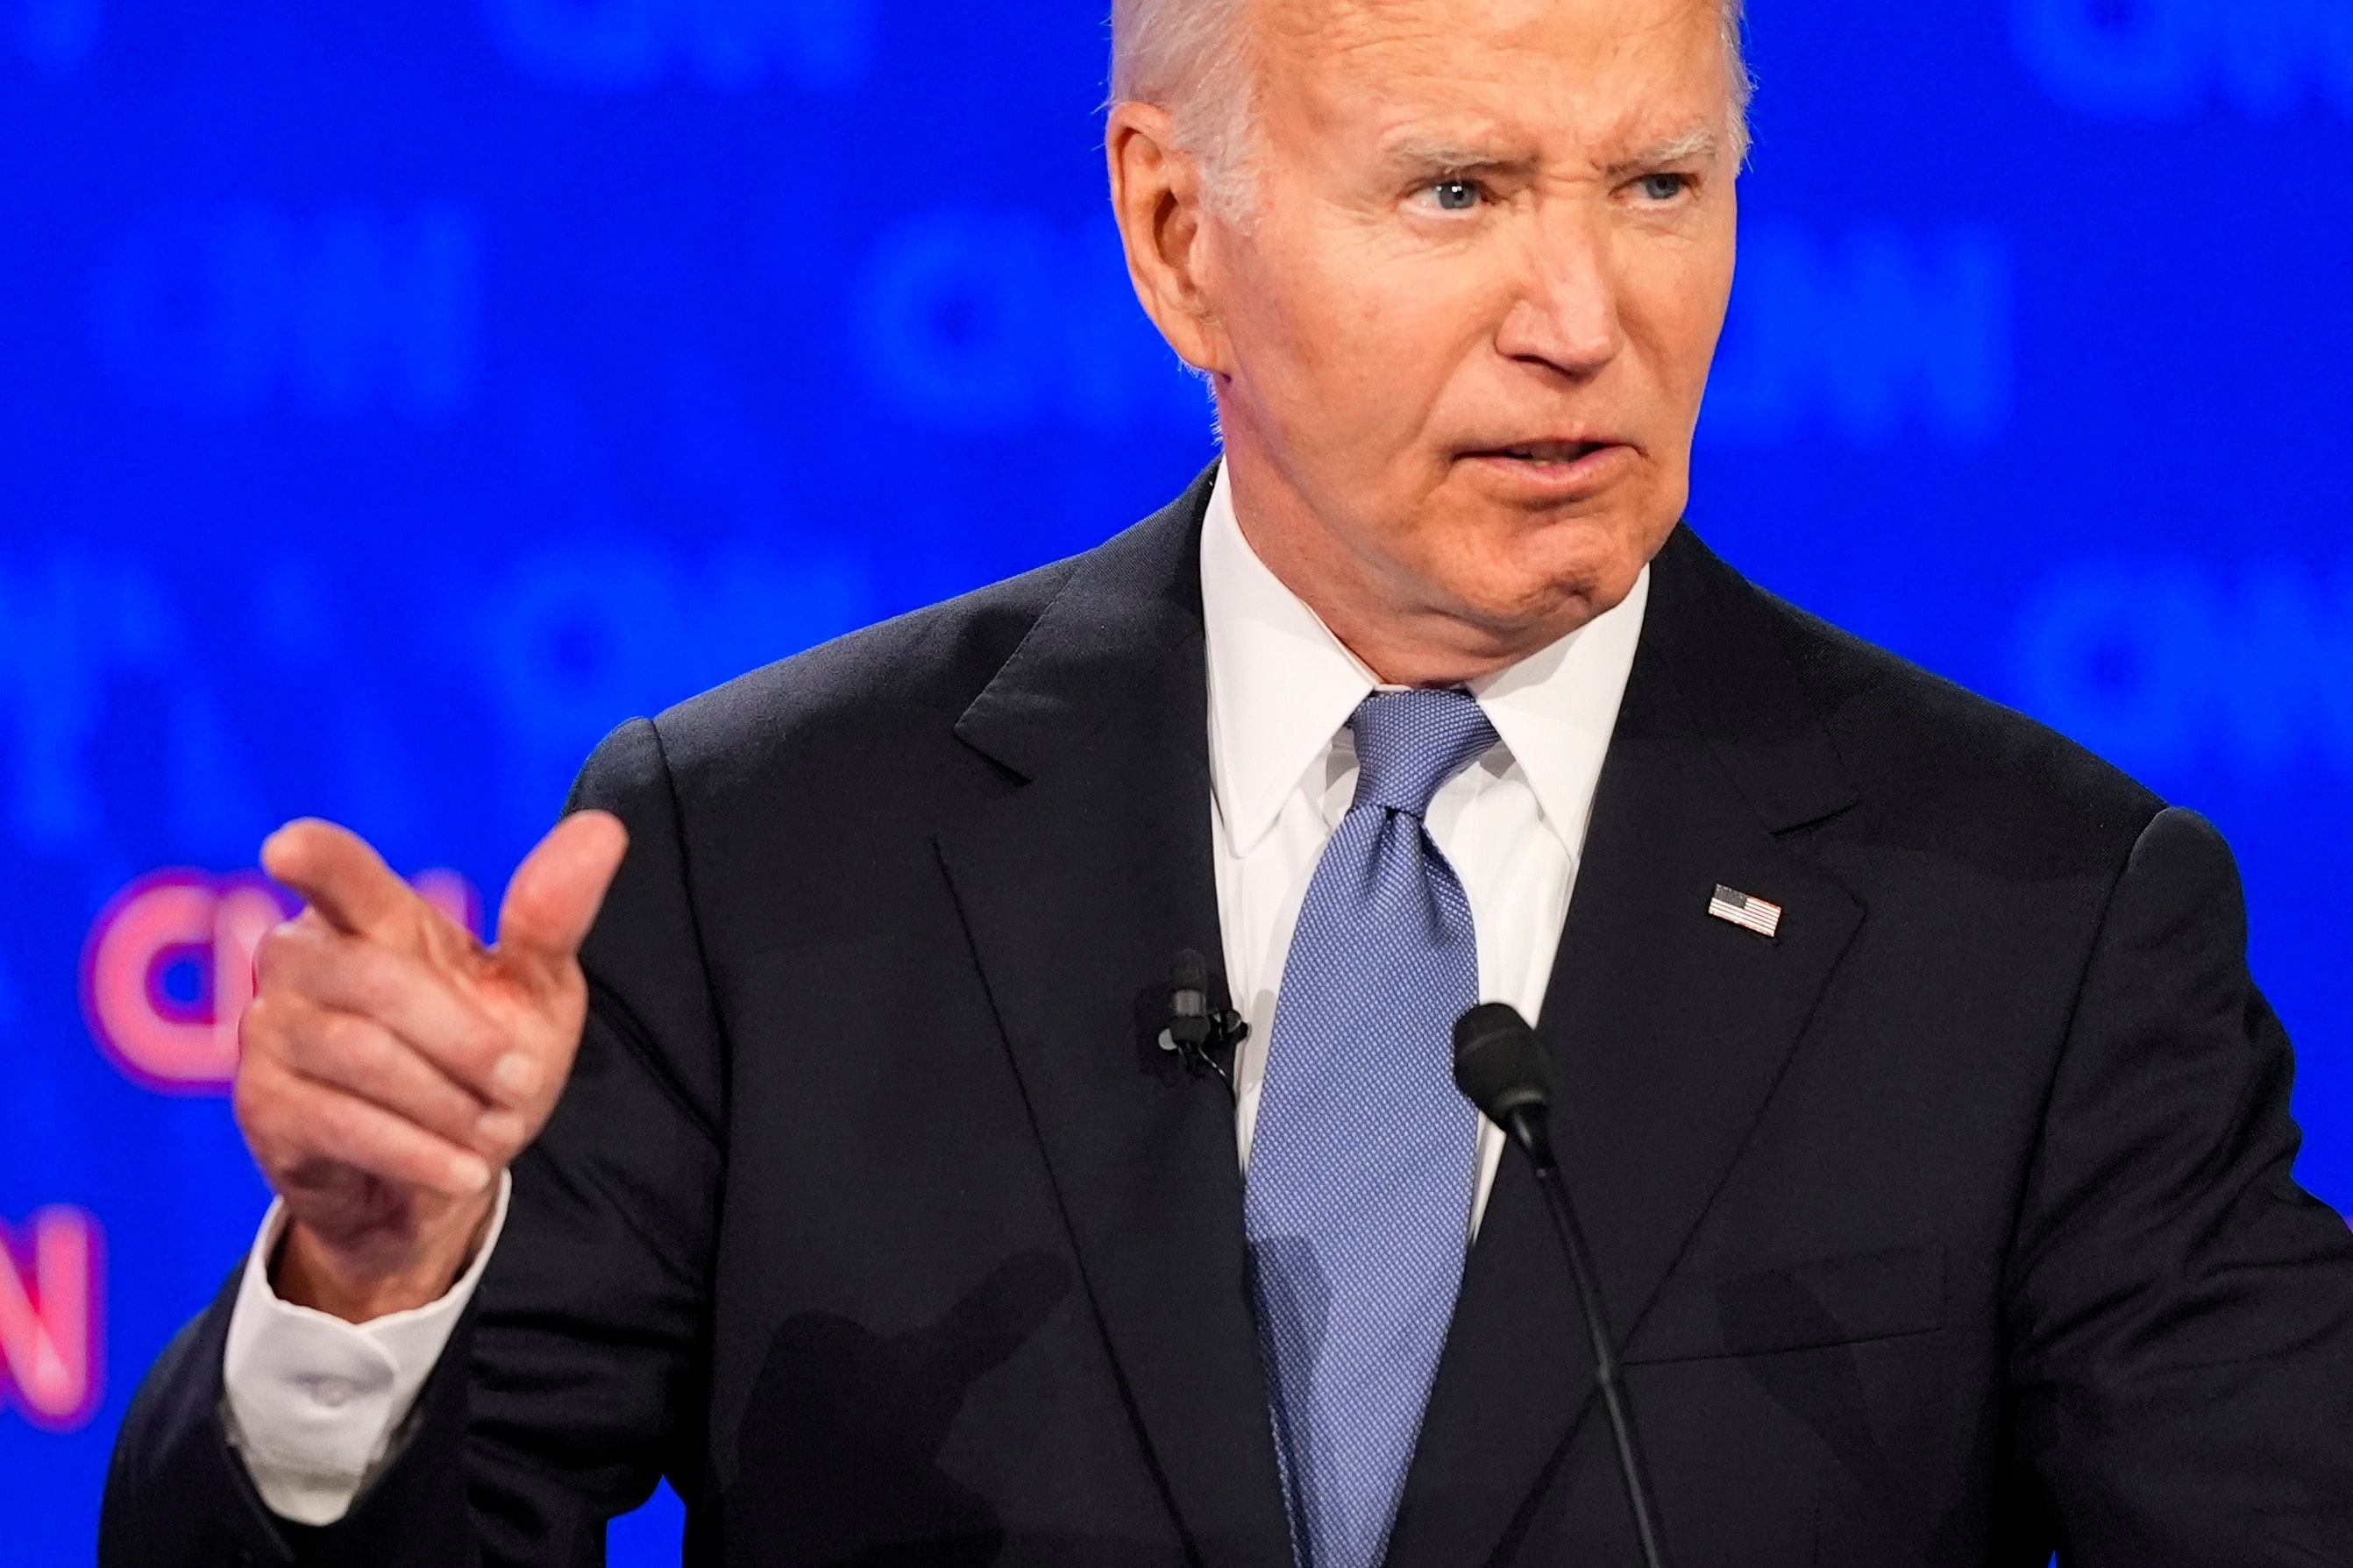 Biden heads into a make-or-break stretch for his imperiled presidential campaign thumbnail